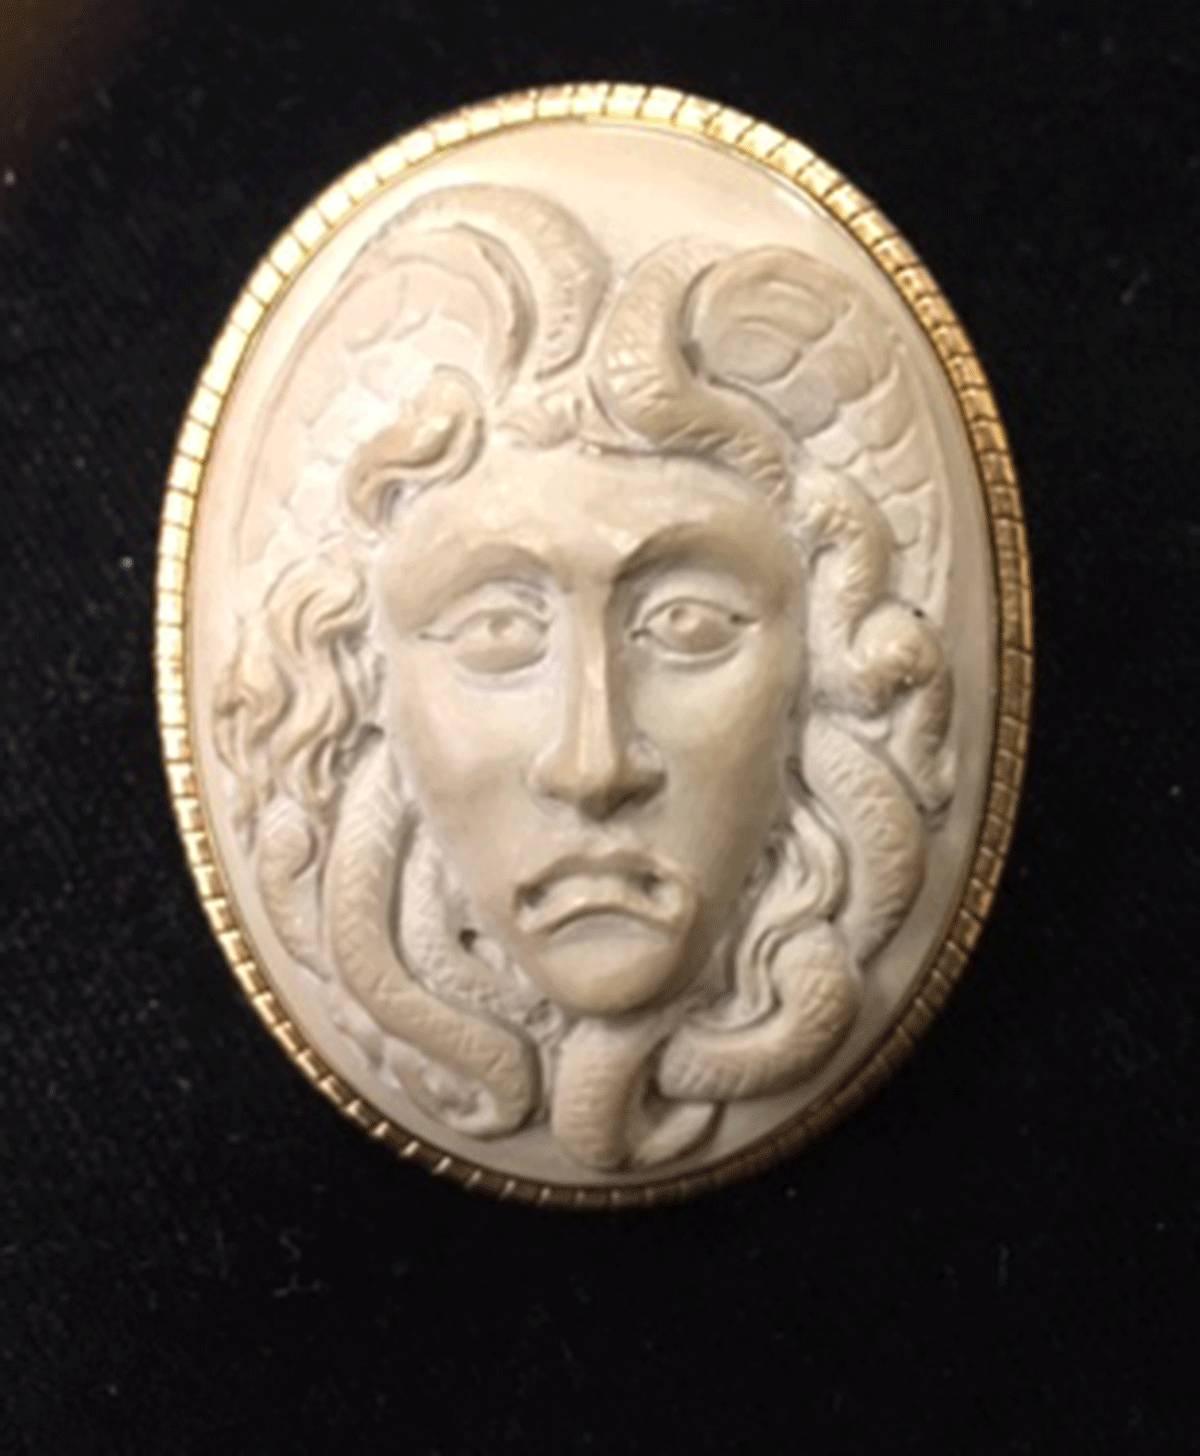 Victorian Lava Cameo Brooch Pendant of Medusa; Beautifully Hand Carved in High Relief ; surround in Solid 18K Gold; surround marked: 750. Approx. size 1.75" x 1.5"; c.1850-1900.  Classic and Timeless...A must have you'll enjoy for many